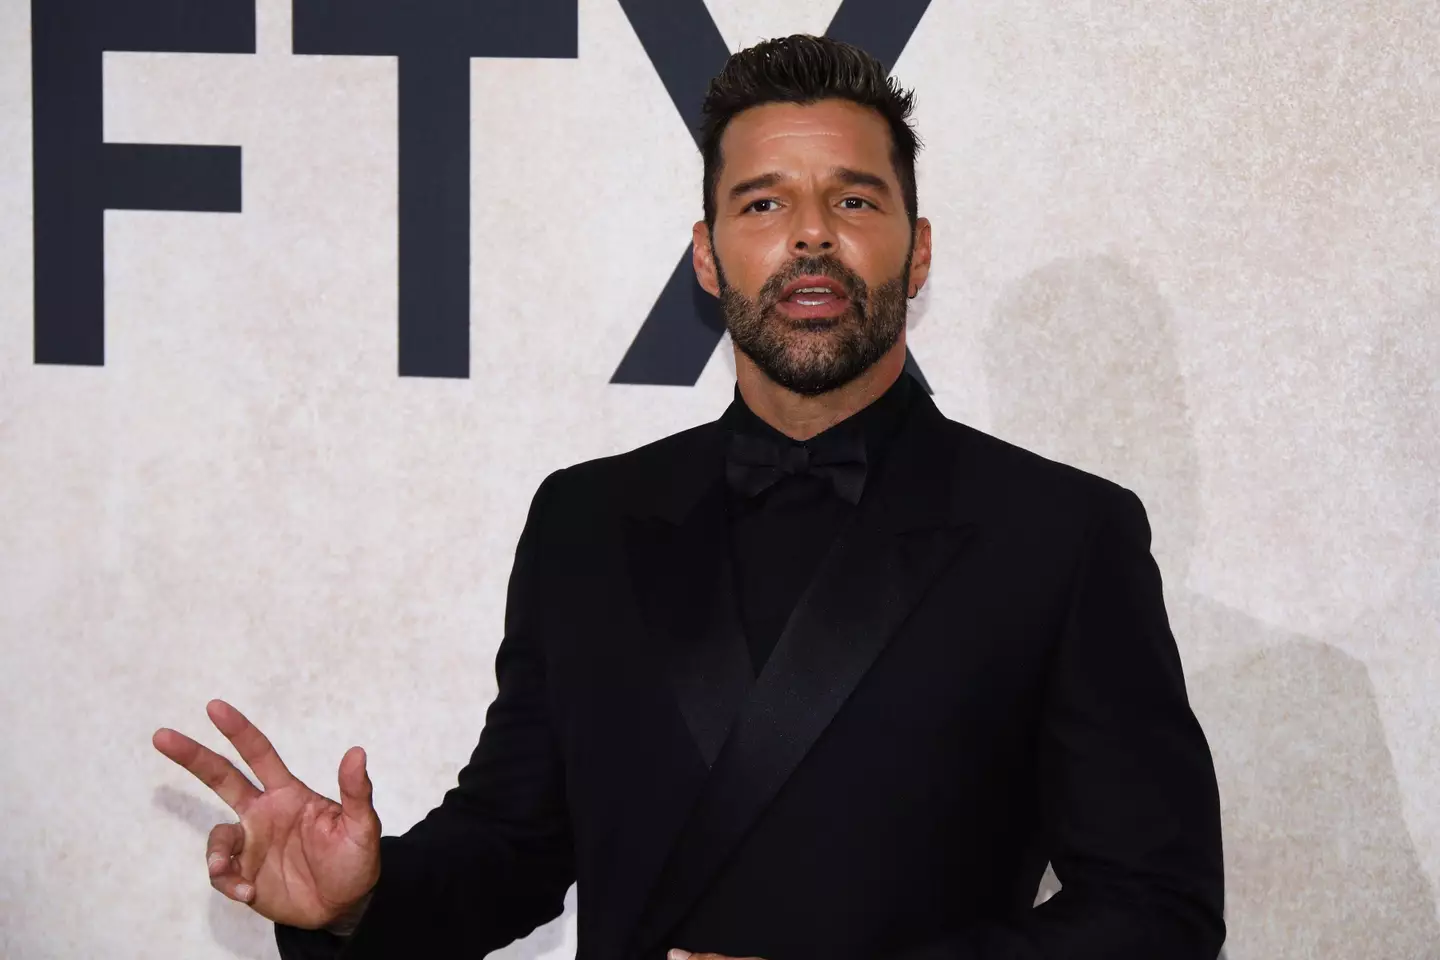 Ricky Martin has filed a $20 million lawsuit against his nephew.